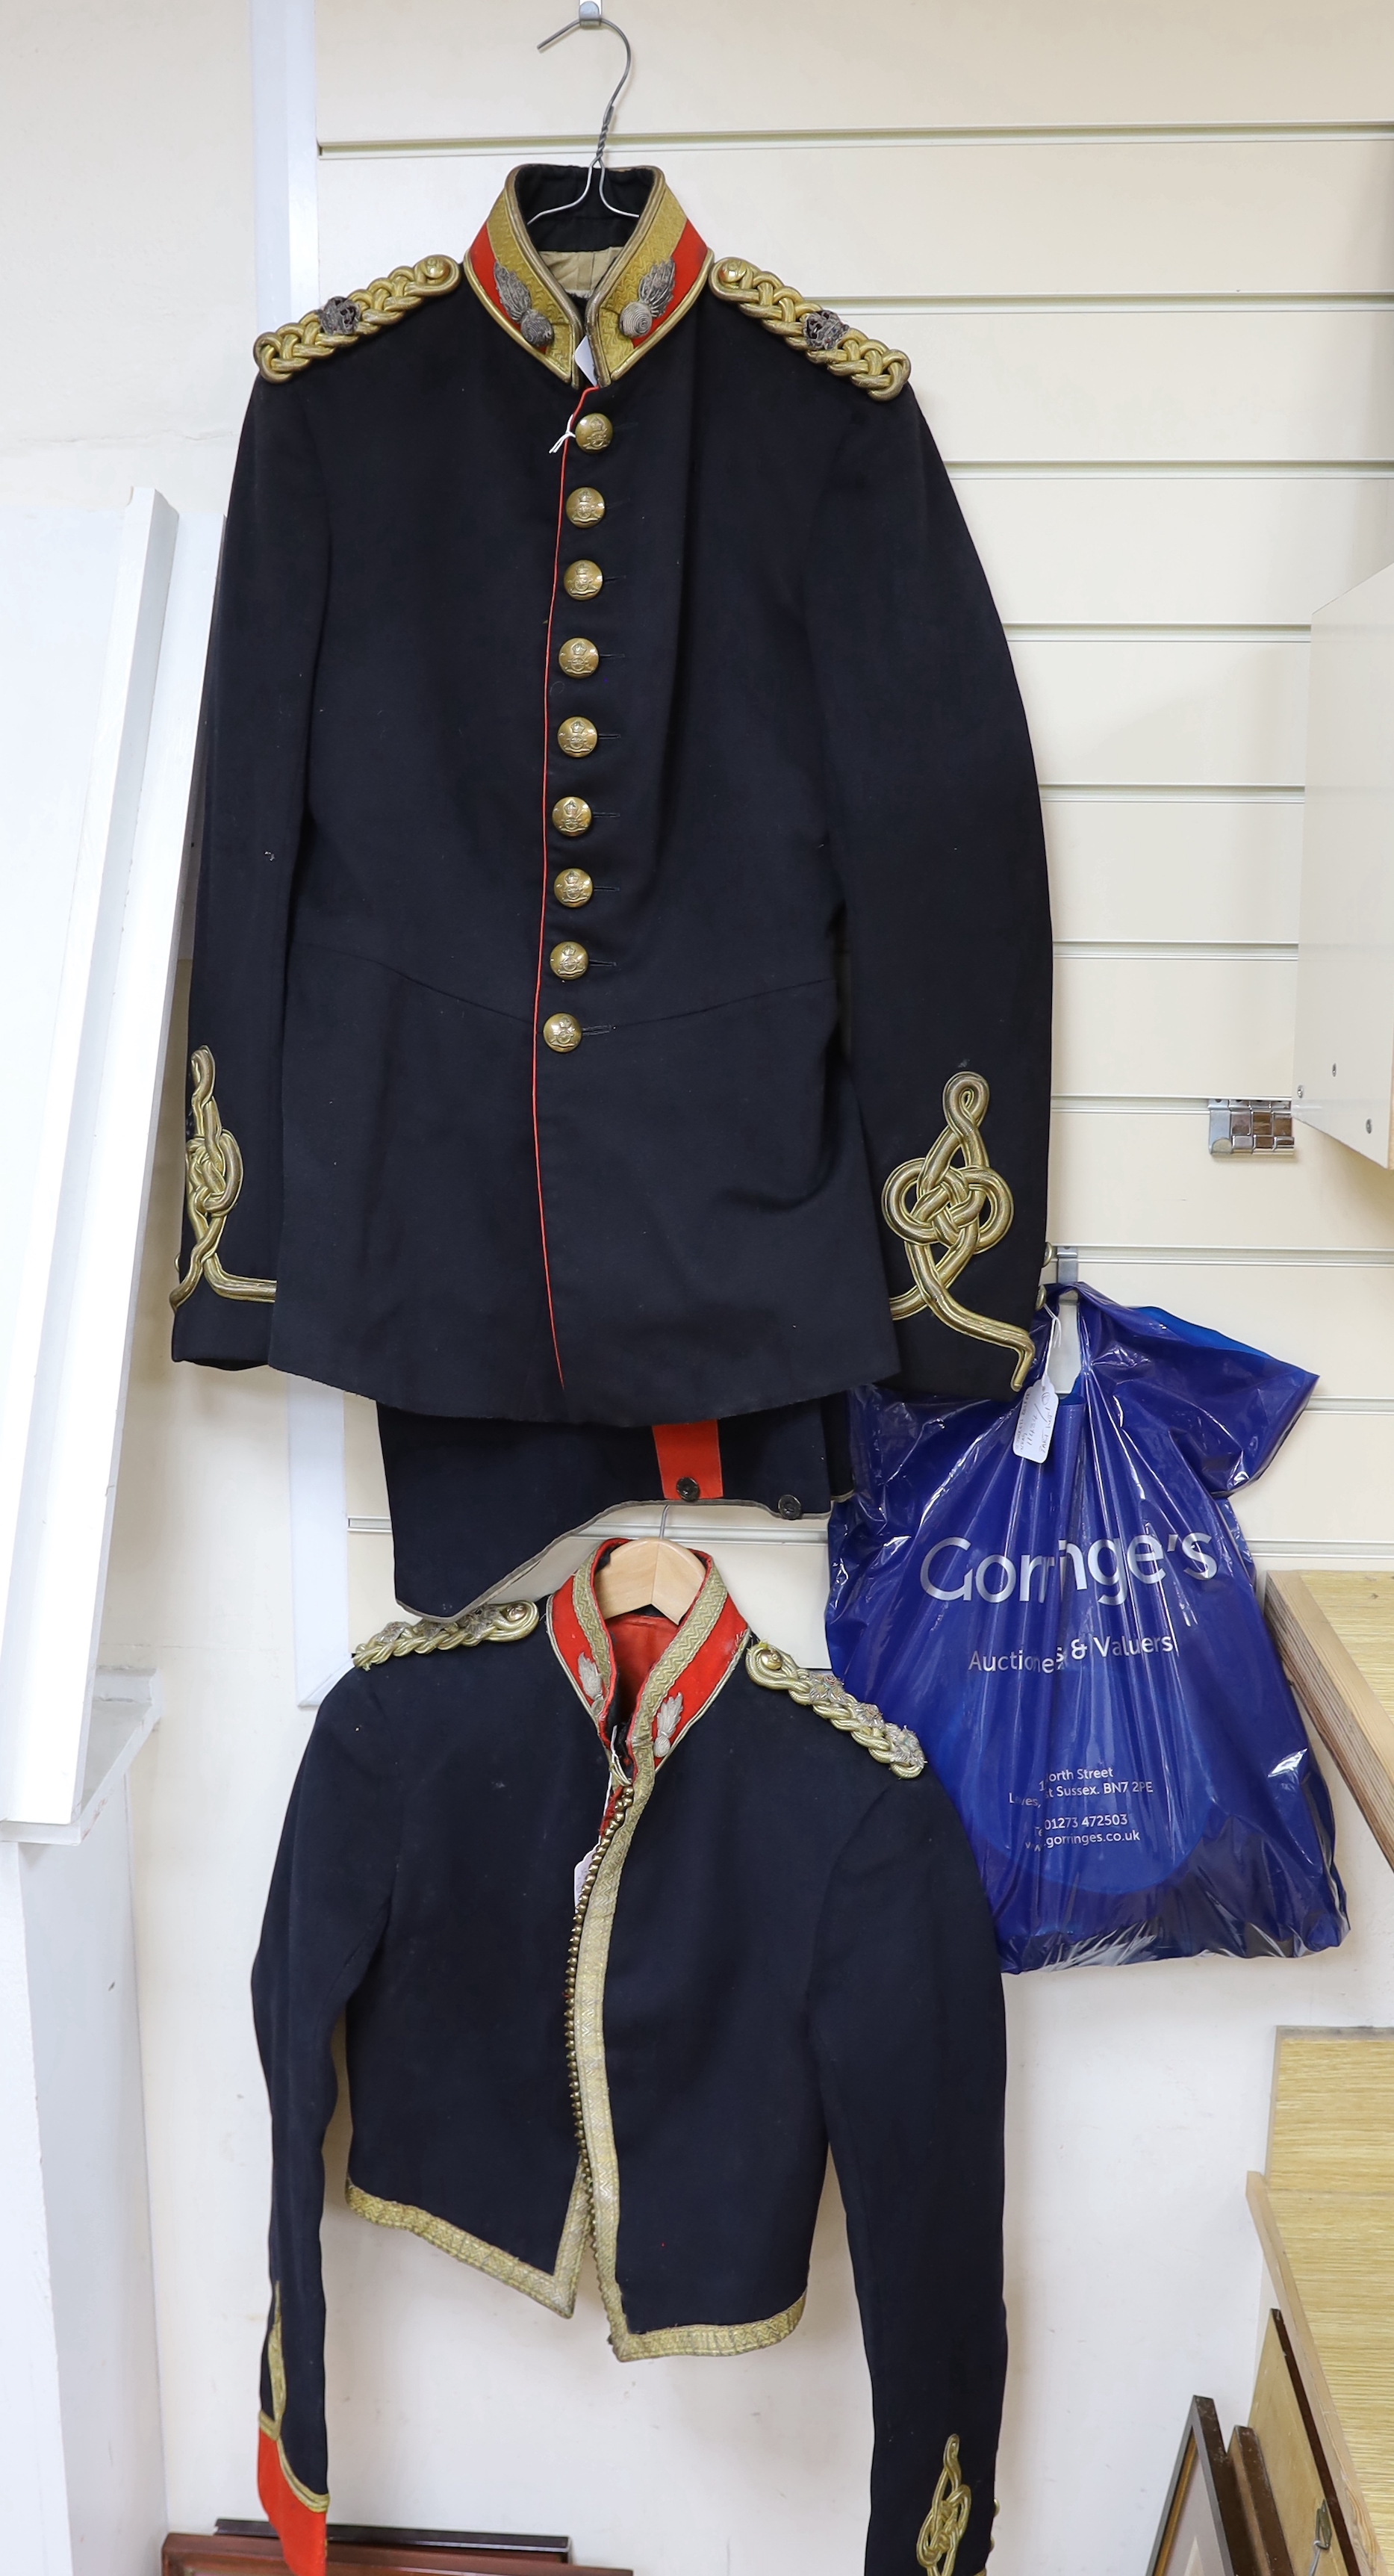 An early 20th century Royal Artillery officers dress uniform, comprising a jacket and trousers, both with original maker’s labels for J. Daniels and Co., with owner’s name ‘Major G.H. Tristram R.A.’ added in pen, a Mess